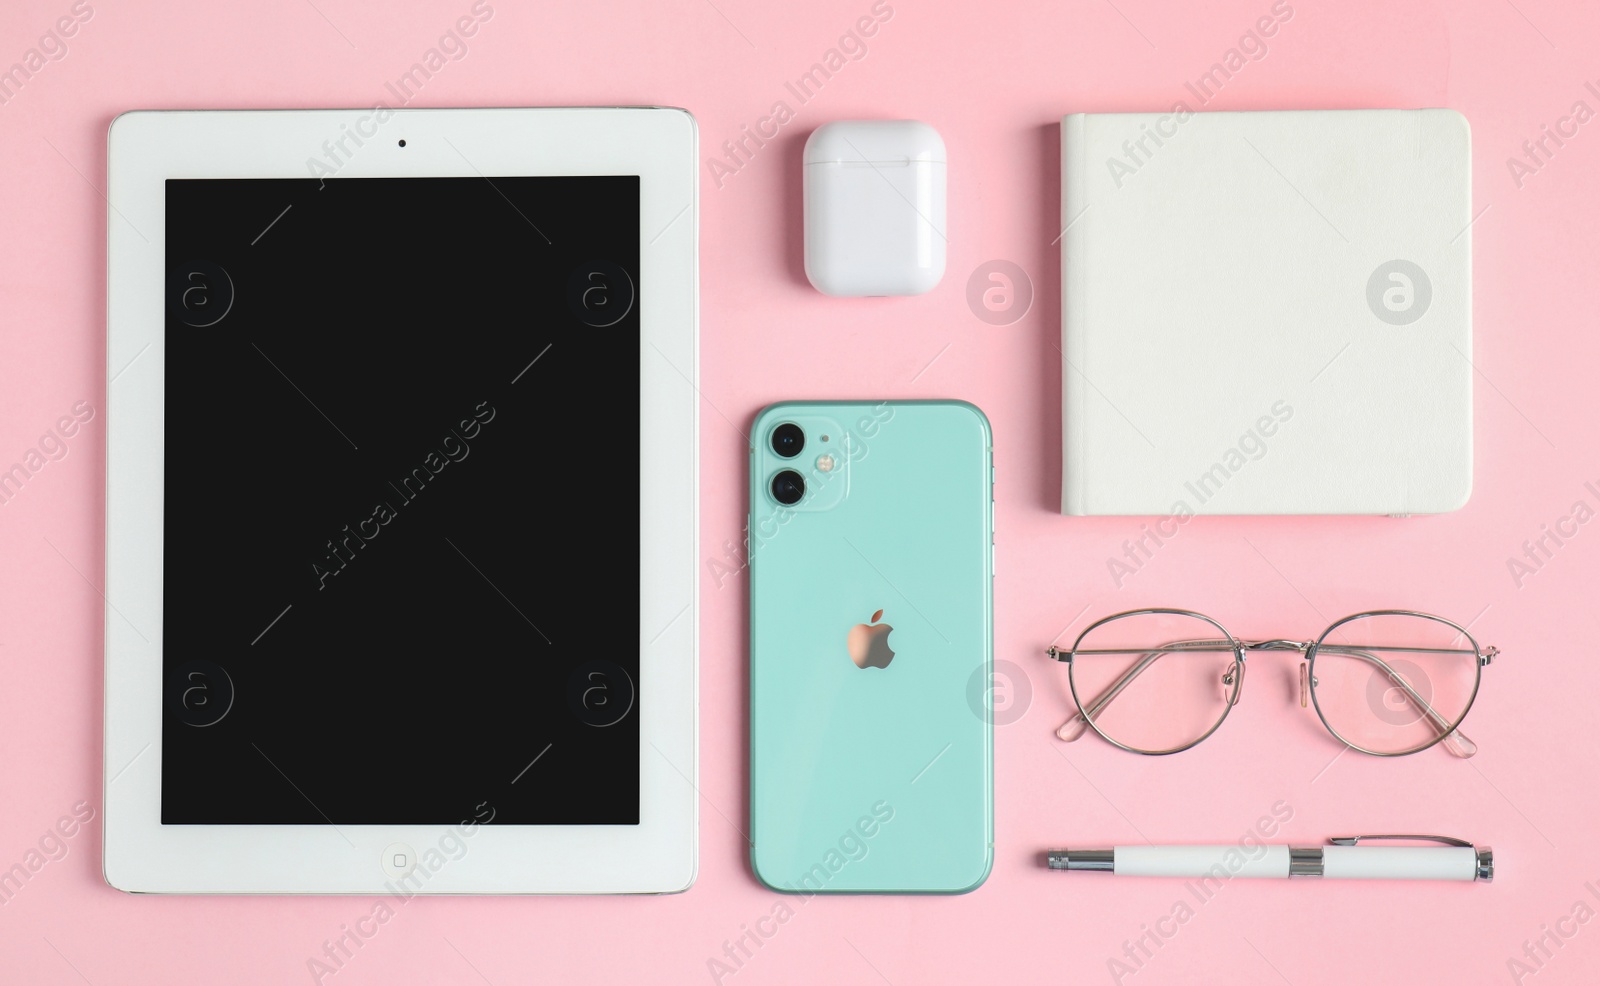 Photo of MYKOLAIV, UKRAINE - JULY 10, 2020: Flat lay composition with Iphone 11, IPad tablet and AirPods on pink background